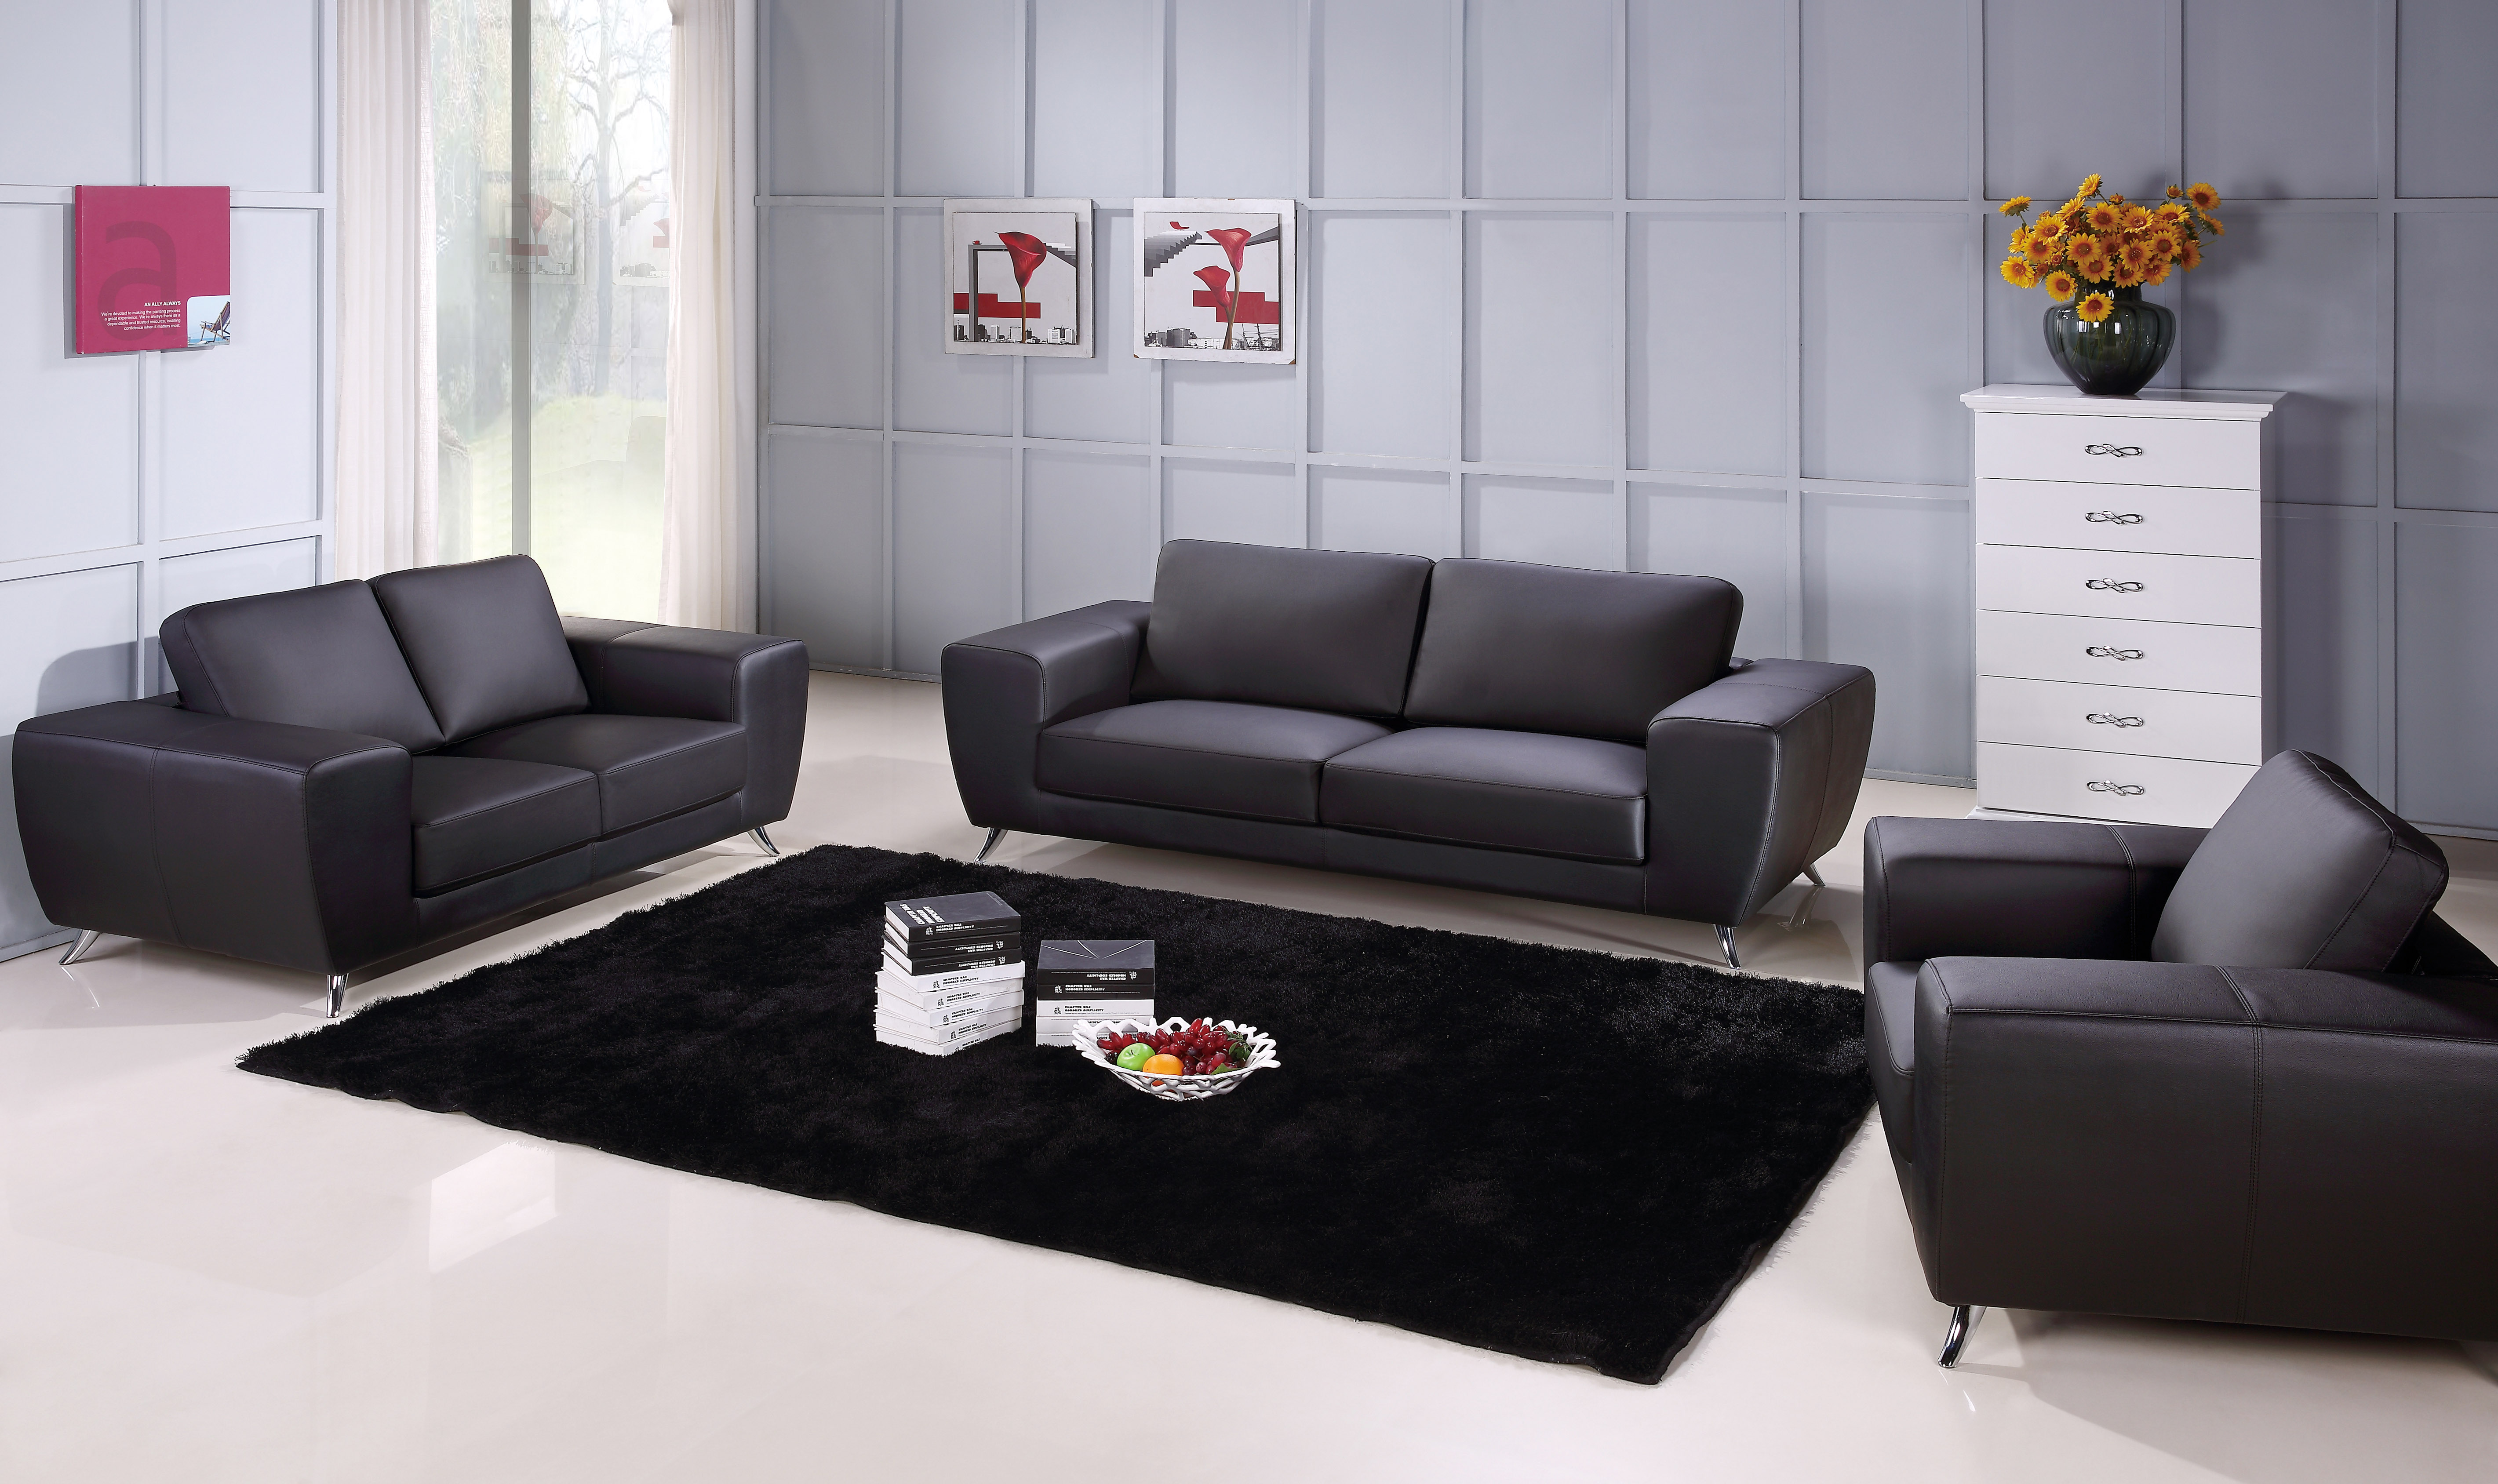 Unique Sofa Set Upholstered in Black Leather Fresno California Beverly ...